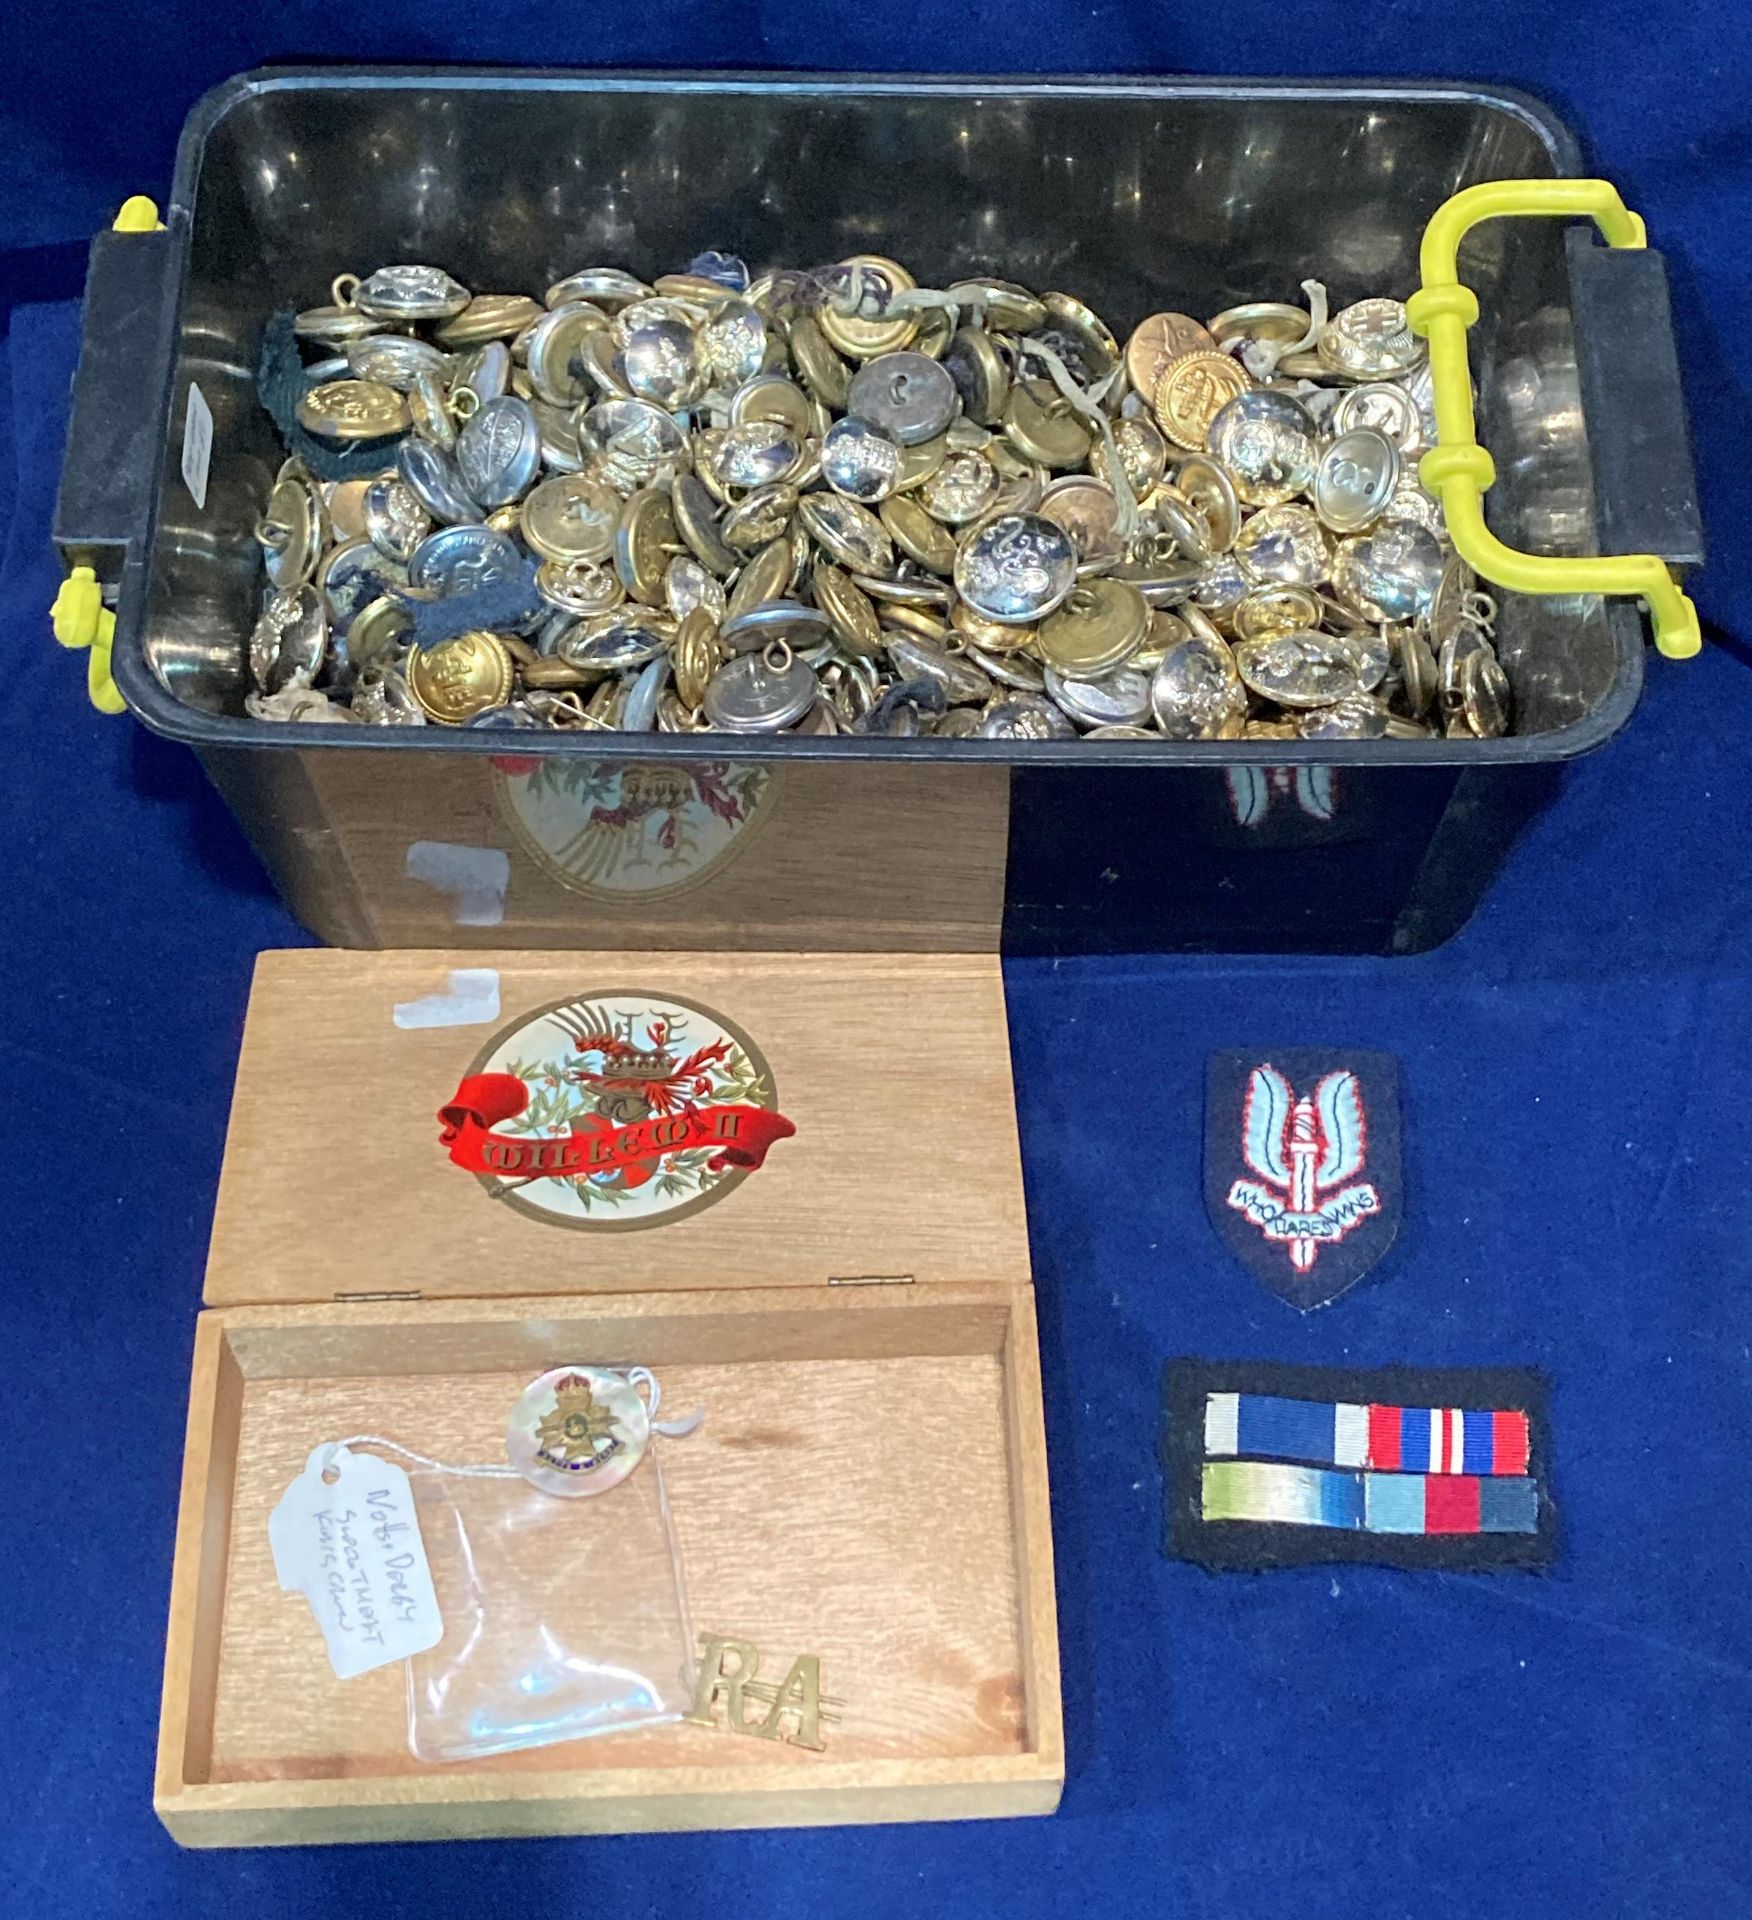 Contents to plastic tray - an extremely large quantity of Military and other buttons,